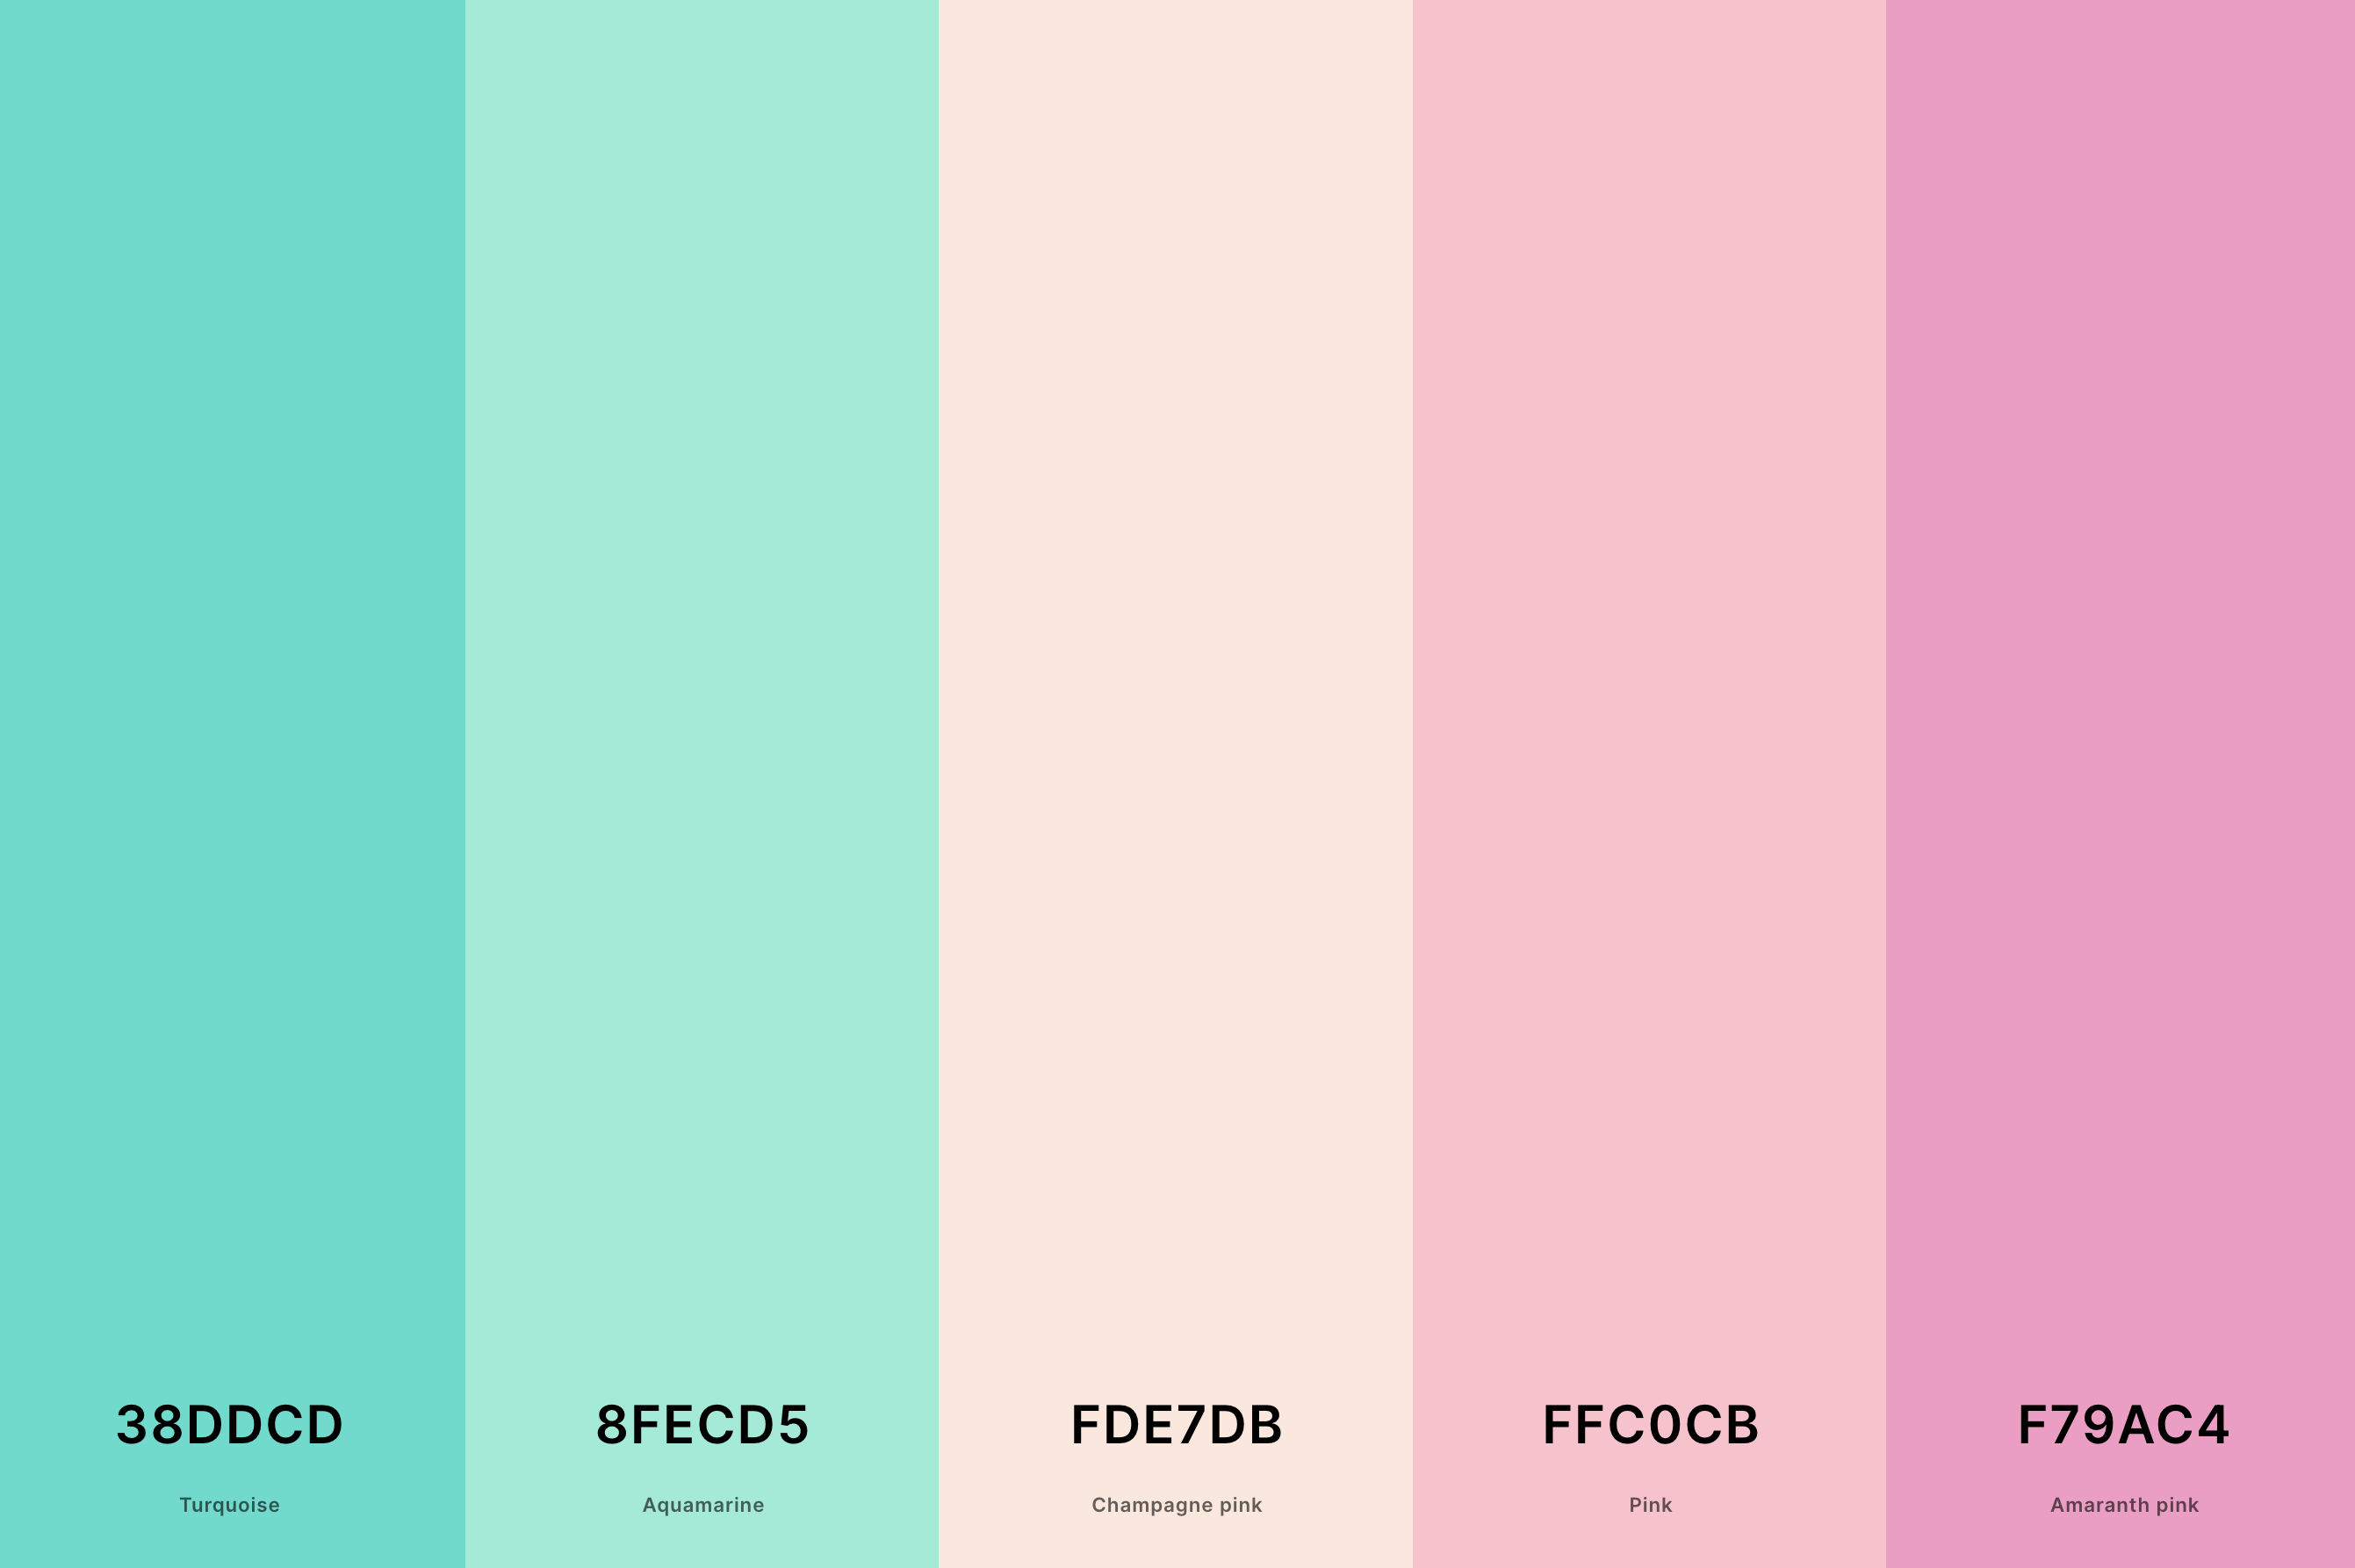 17. Pink And Turquoise Color Palette Color Palette with Turquoise (Hex #38DDCD) + Aquamarine (Hex #8FECD5) + Champagne Pink (Hex #FDE7DB) + Pink (Hex #FFC0CB) + Amaranth Pink (Hex #F79AC4) Color Palette with Hex Codes